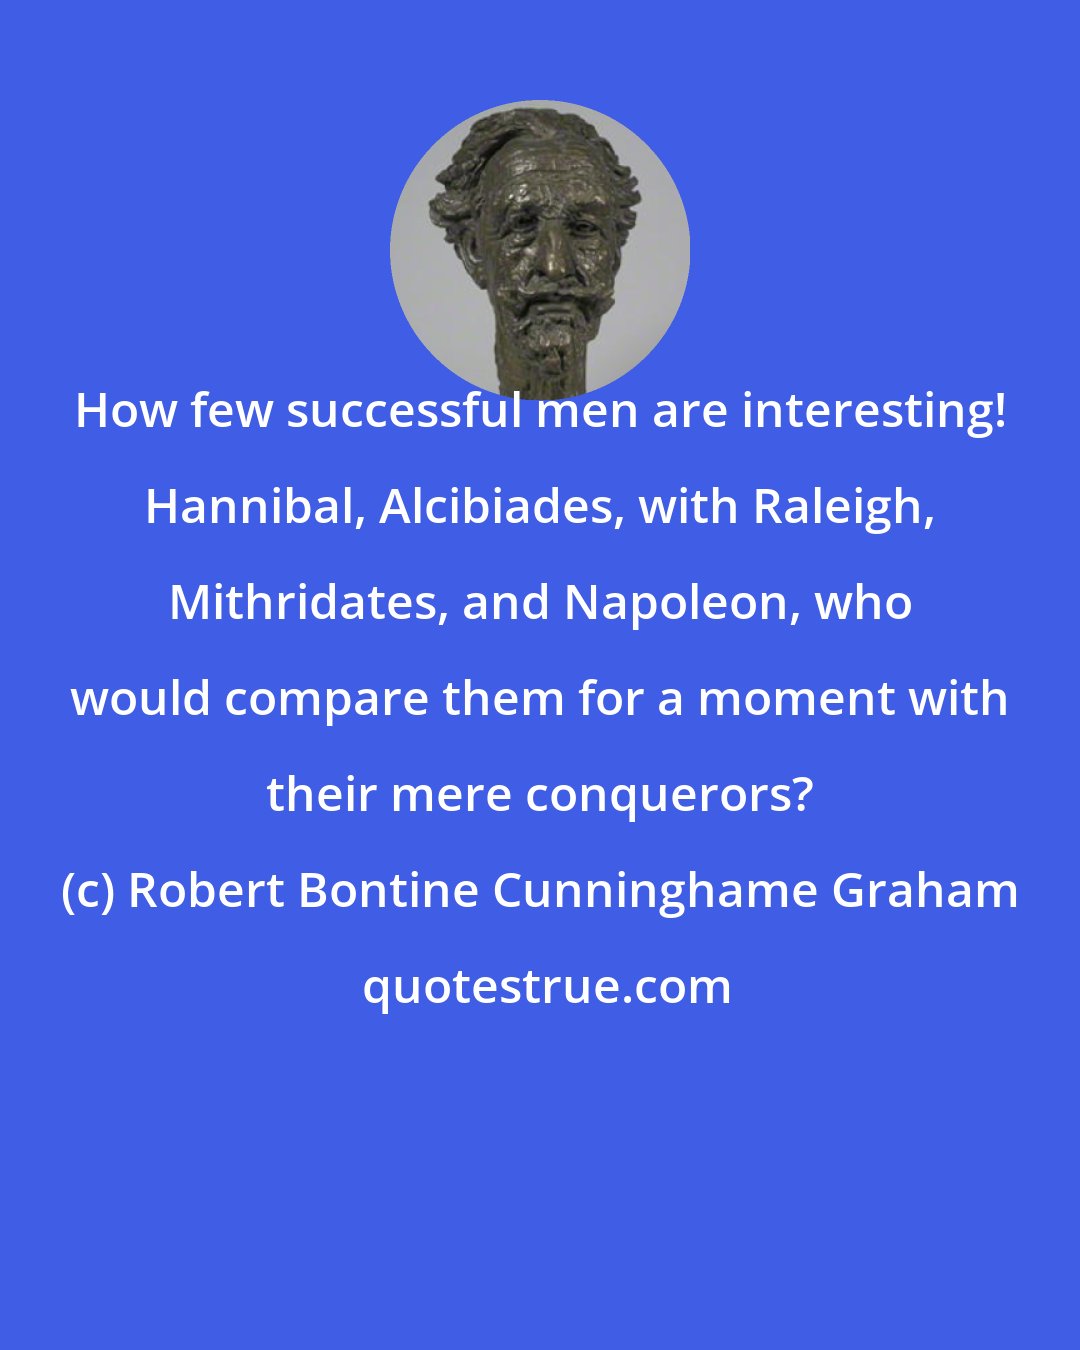 Robert Bontine Cunninghame Graham: How few successful men are interesting! Hannibal, Alcibiades, with Raleigh, Mithridates, and Napoleon, who would compare them for a moment with their mere conquerors?